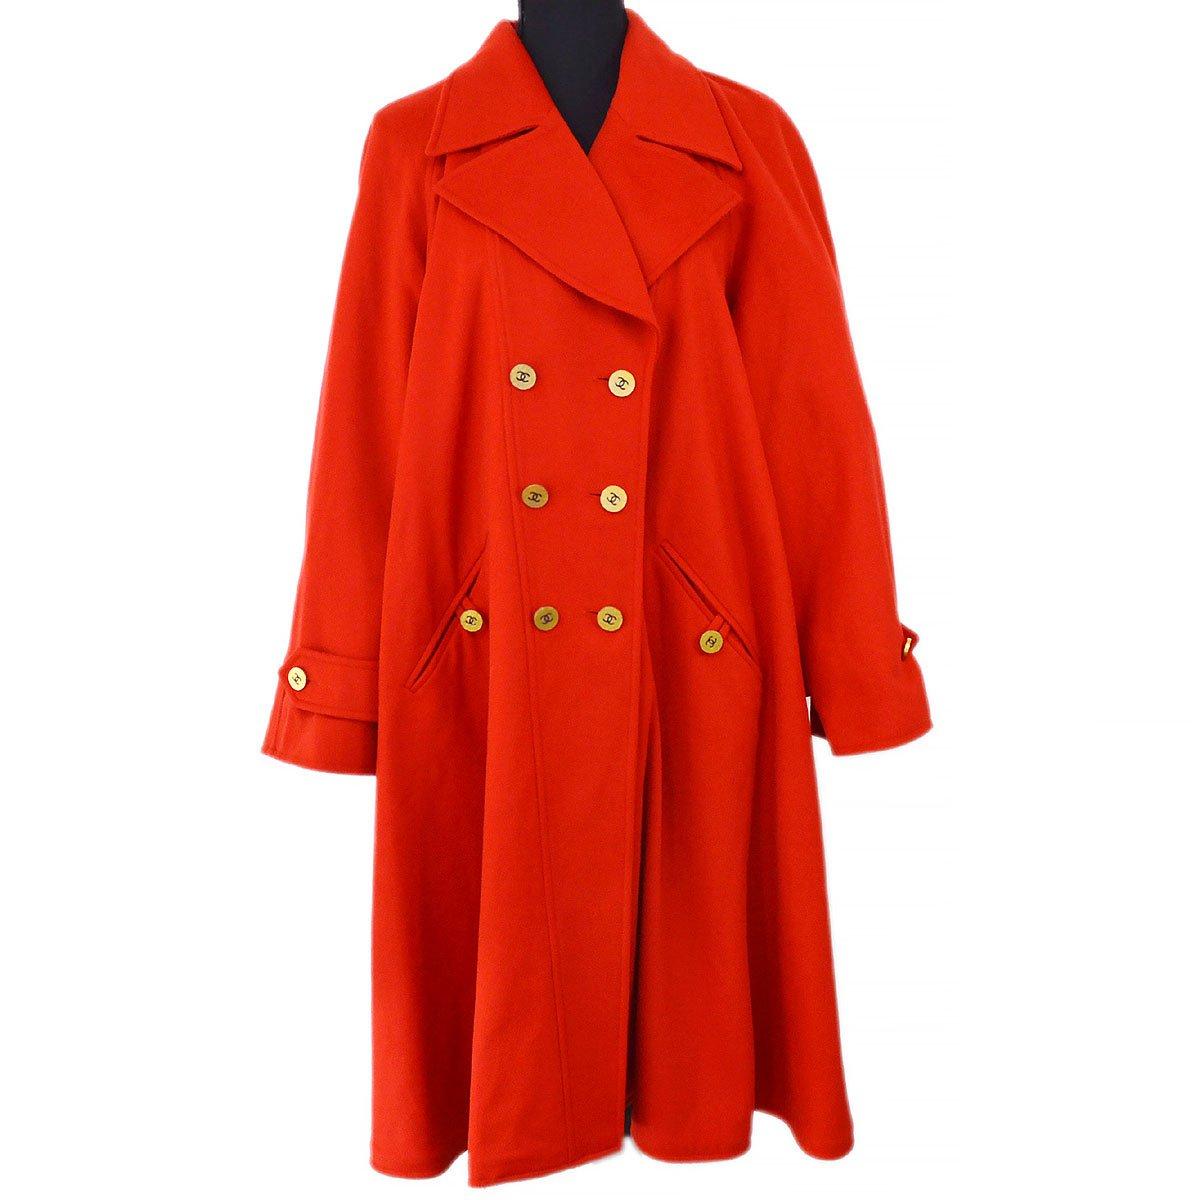 Chanel 1994 Cashmere Double-breasted Coat #38 in Red